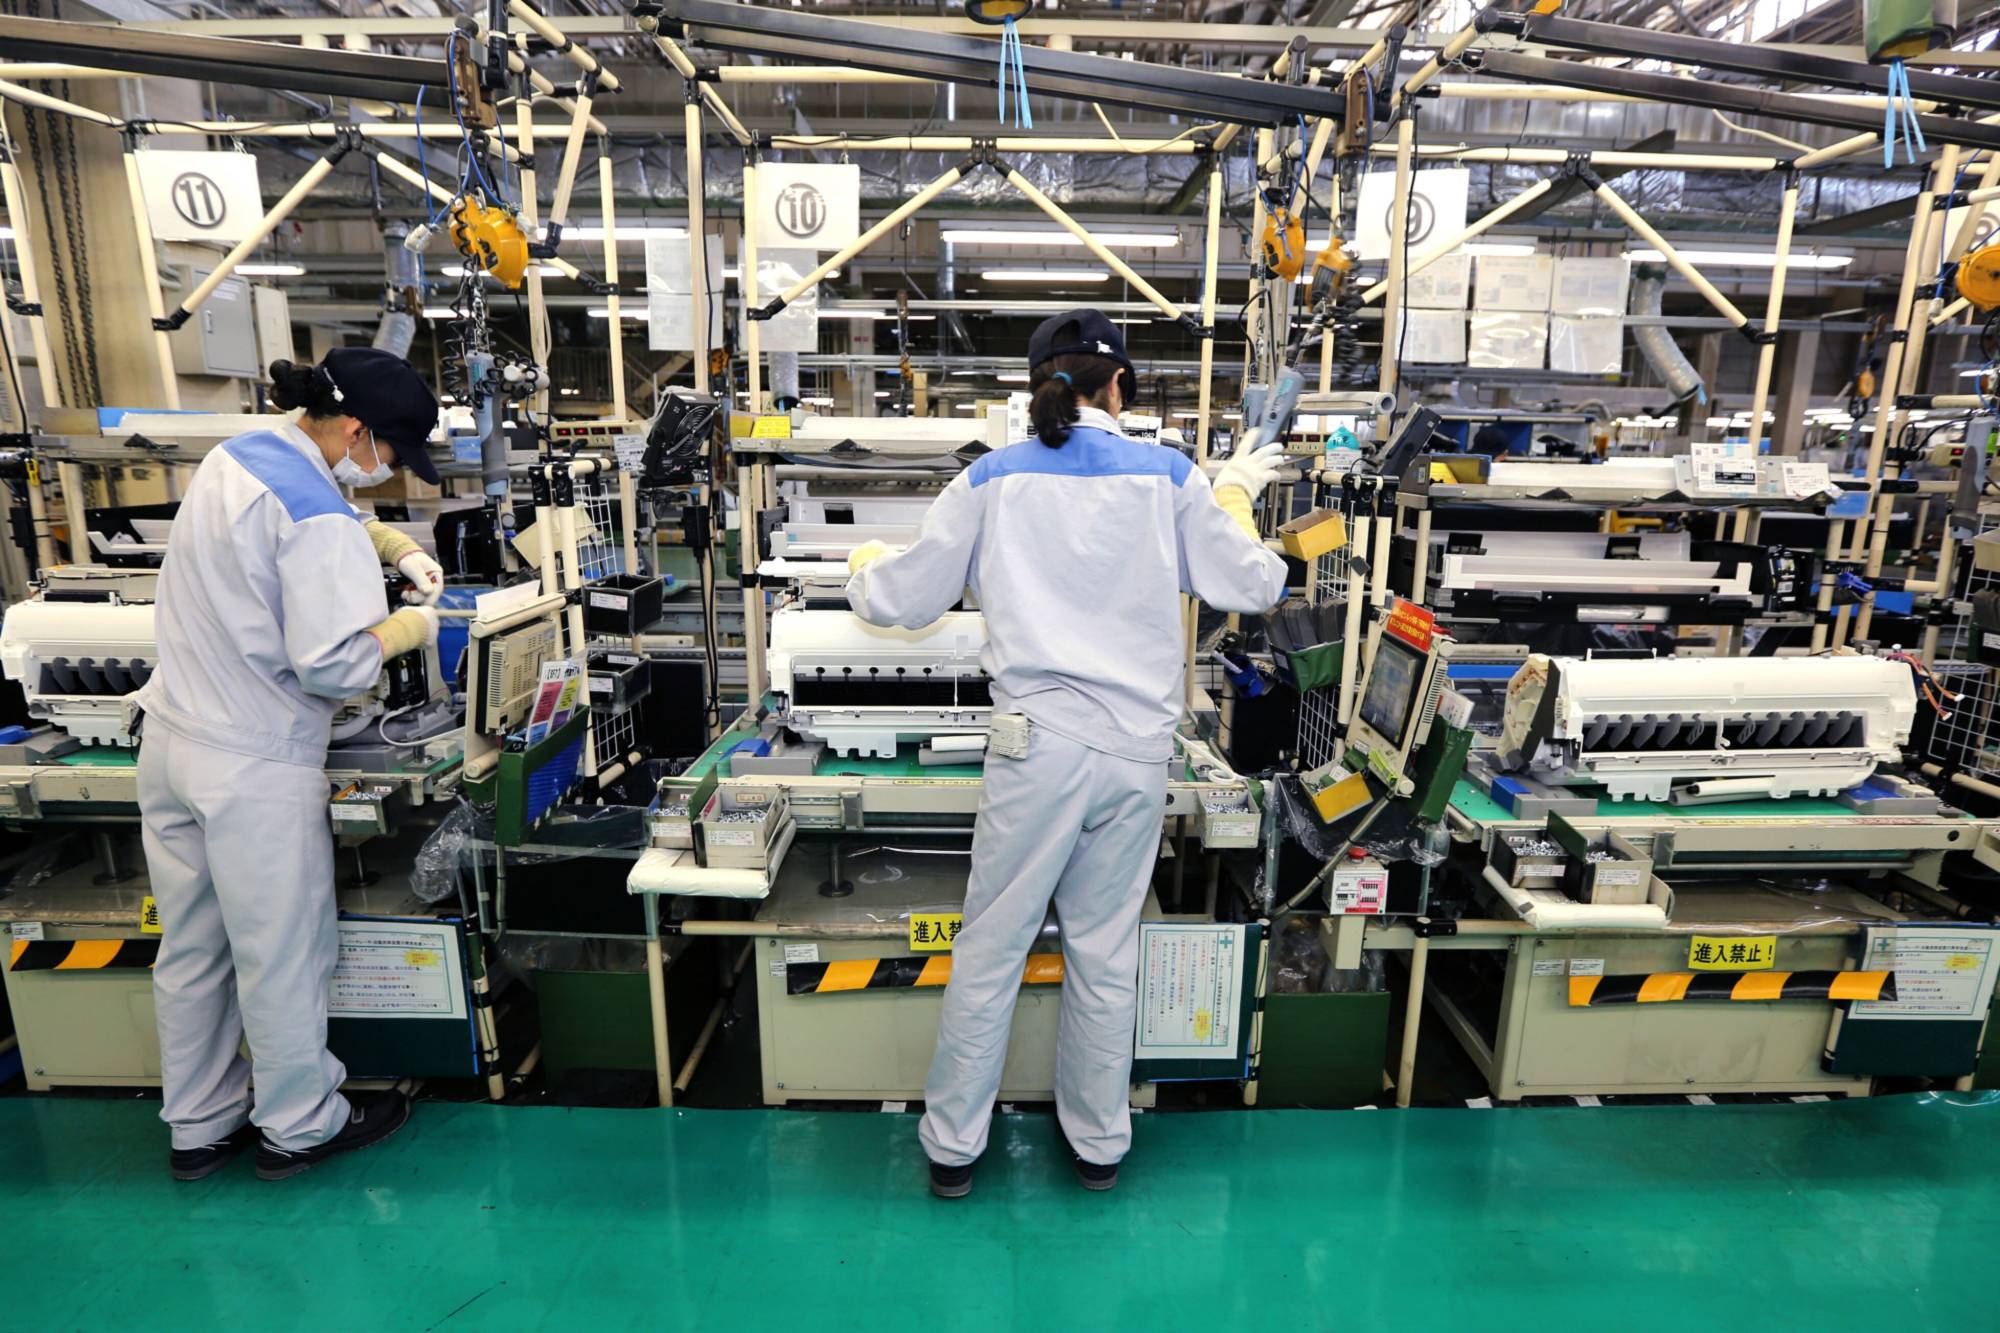 Workers assemble indoor units of Daikin Industries split type air conditioners at the company's plant in Kusatsu, Shiga Prefecture, in August 2017. The firm has plans to establish an air-conditioner production supply chain without relying on Chinese components. | BLOOMBERG